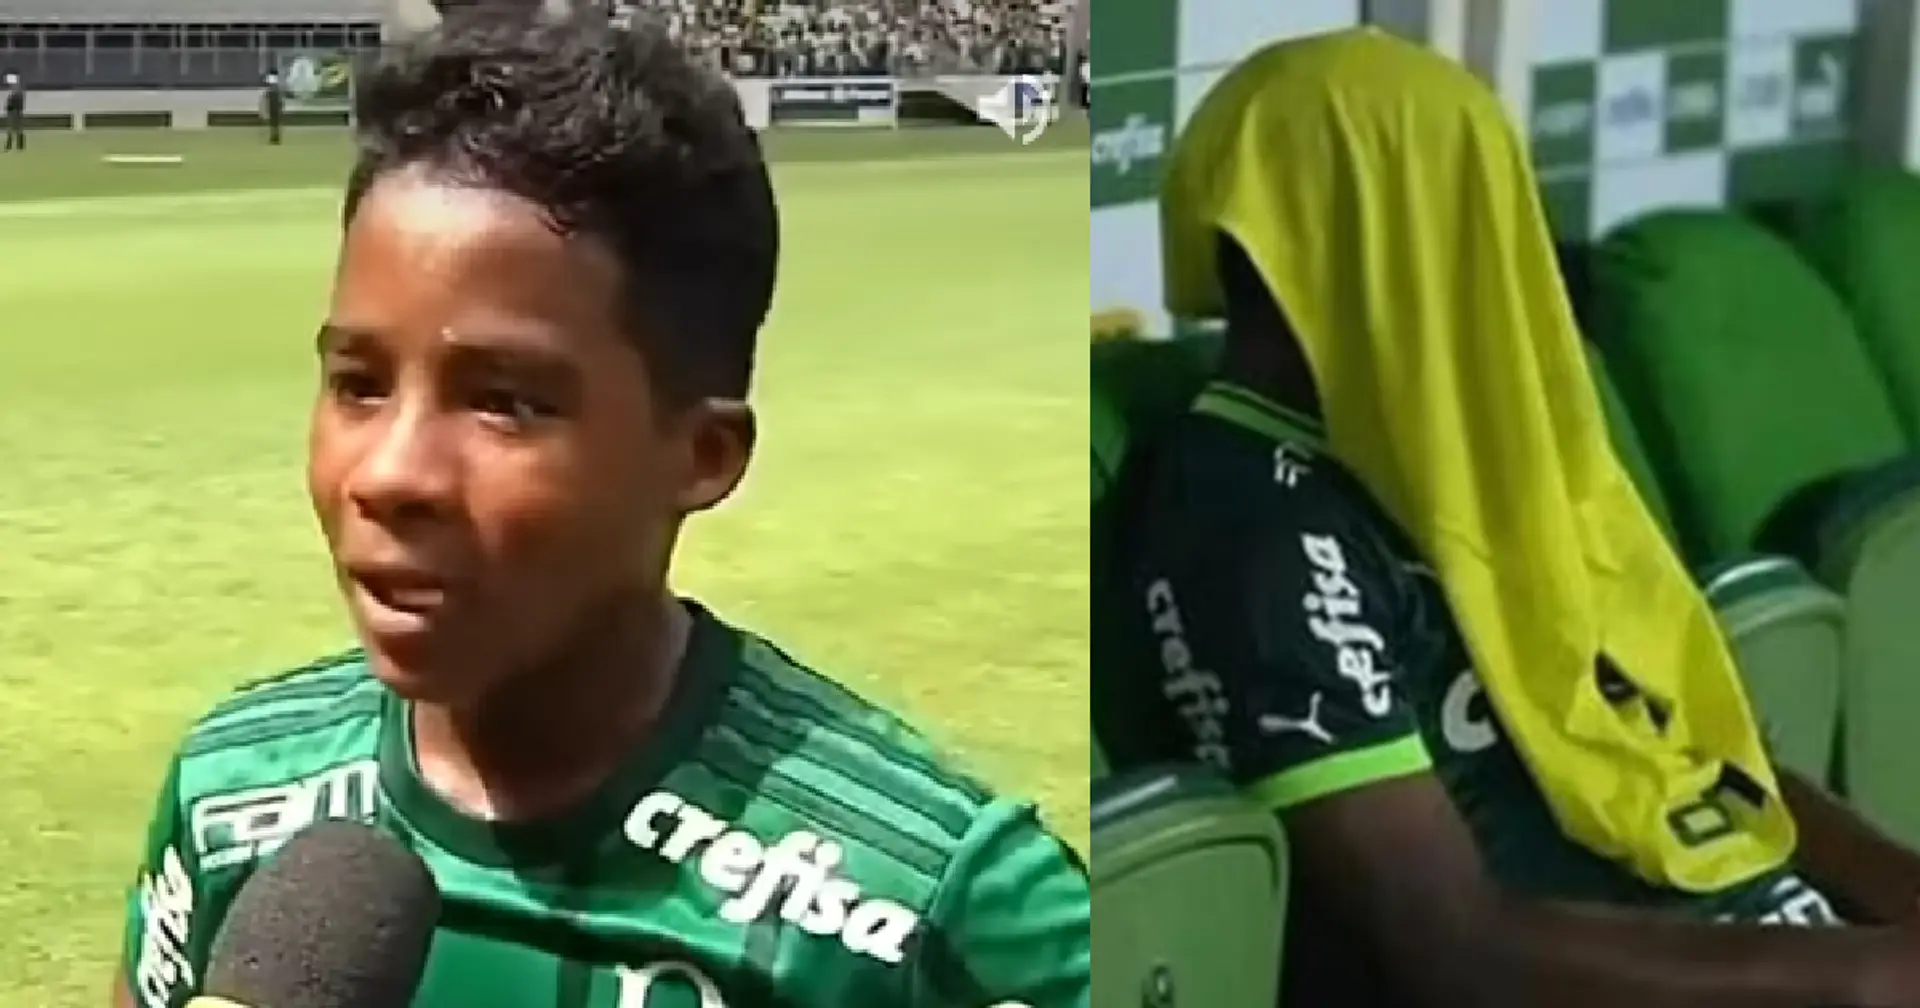 'I'm sad': Endrick breaks silence on lack of playing time at Palmeiras